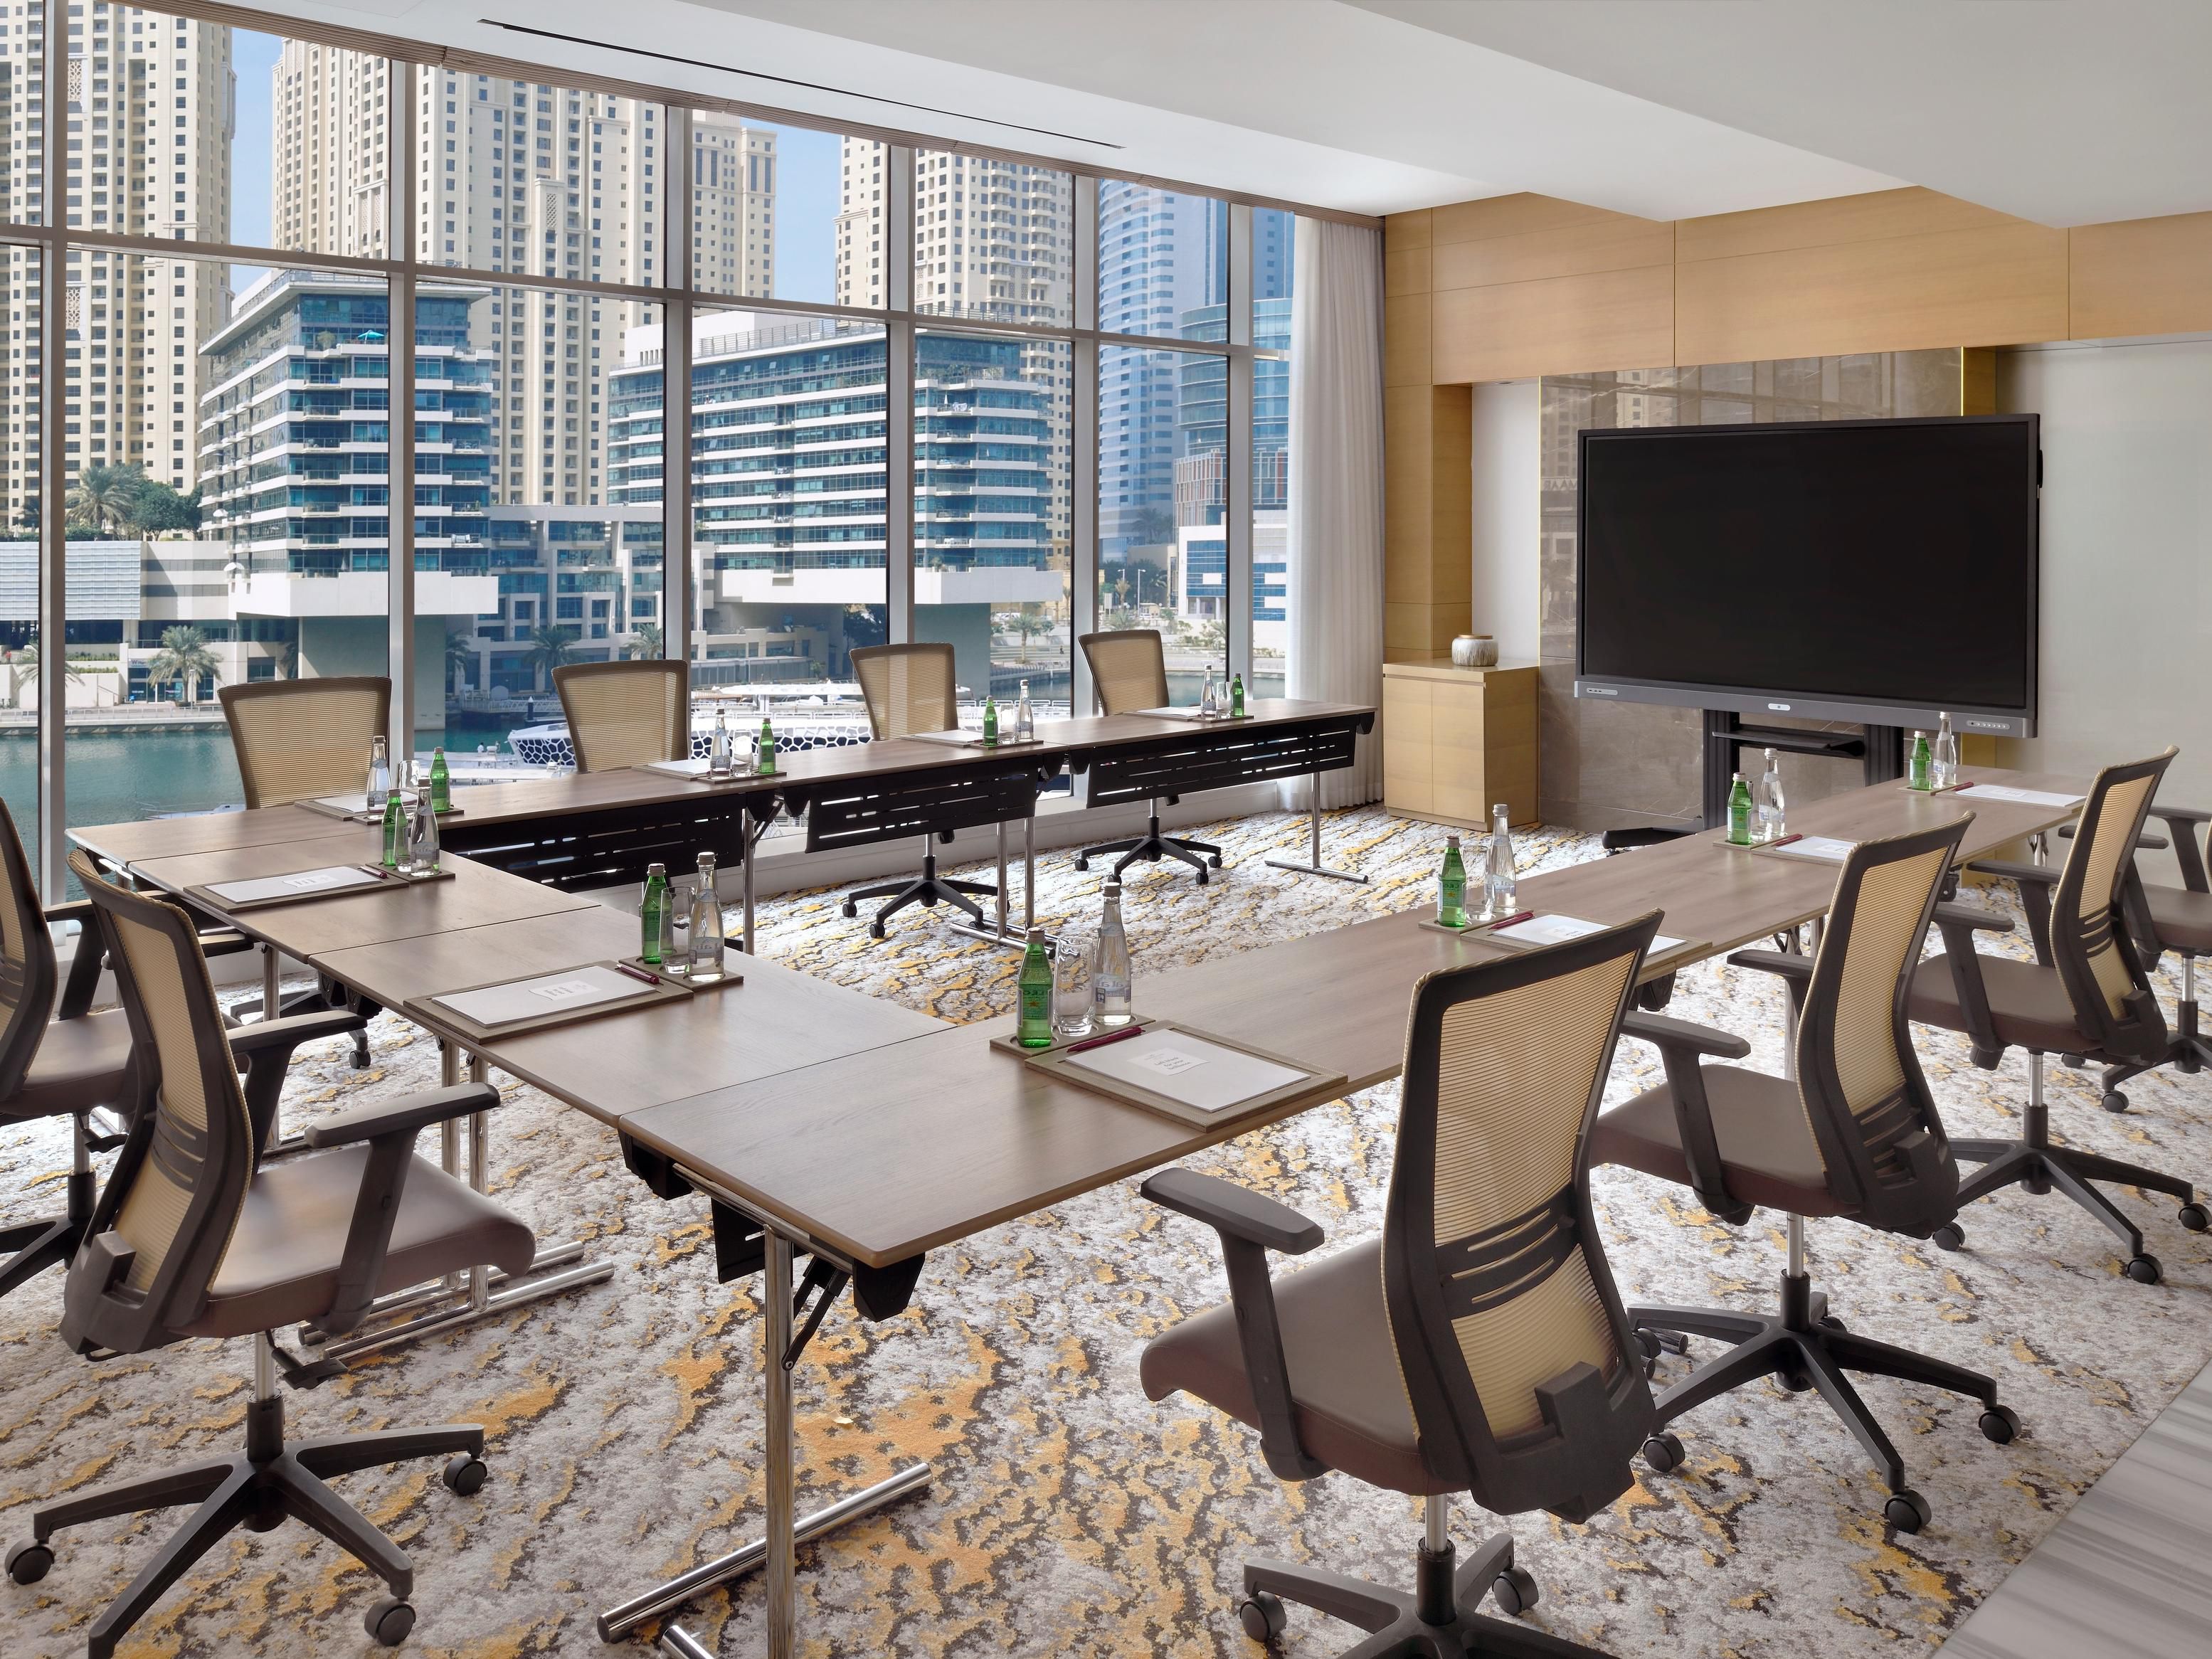 The Crowne Plaza® Dubai Marina is an exceptional location for meetings and events. The hotel boasts 460 sq meters of conference space. Our Marina Ballroom offers natural daylight as well as serene views of the Dubai Marina, which serves as the perfect backdrop to any meeting or special occasion.